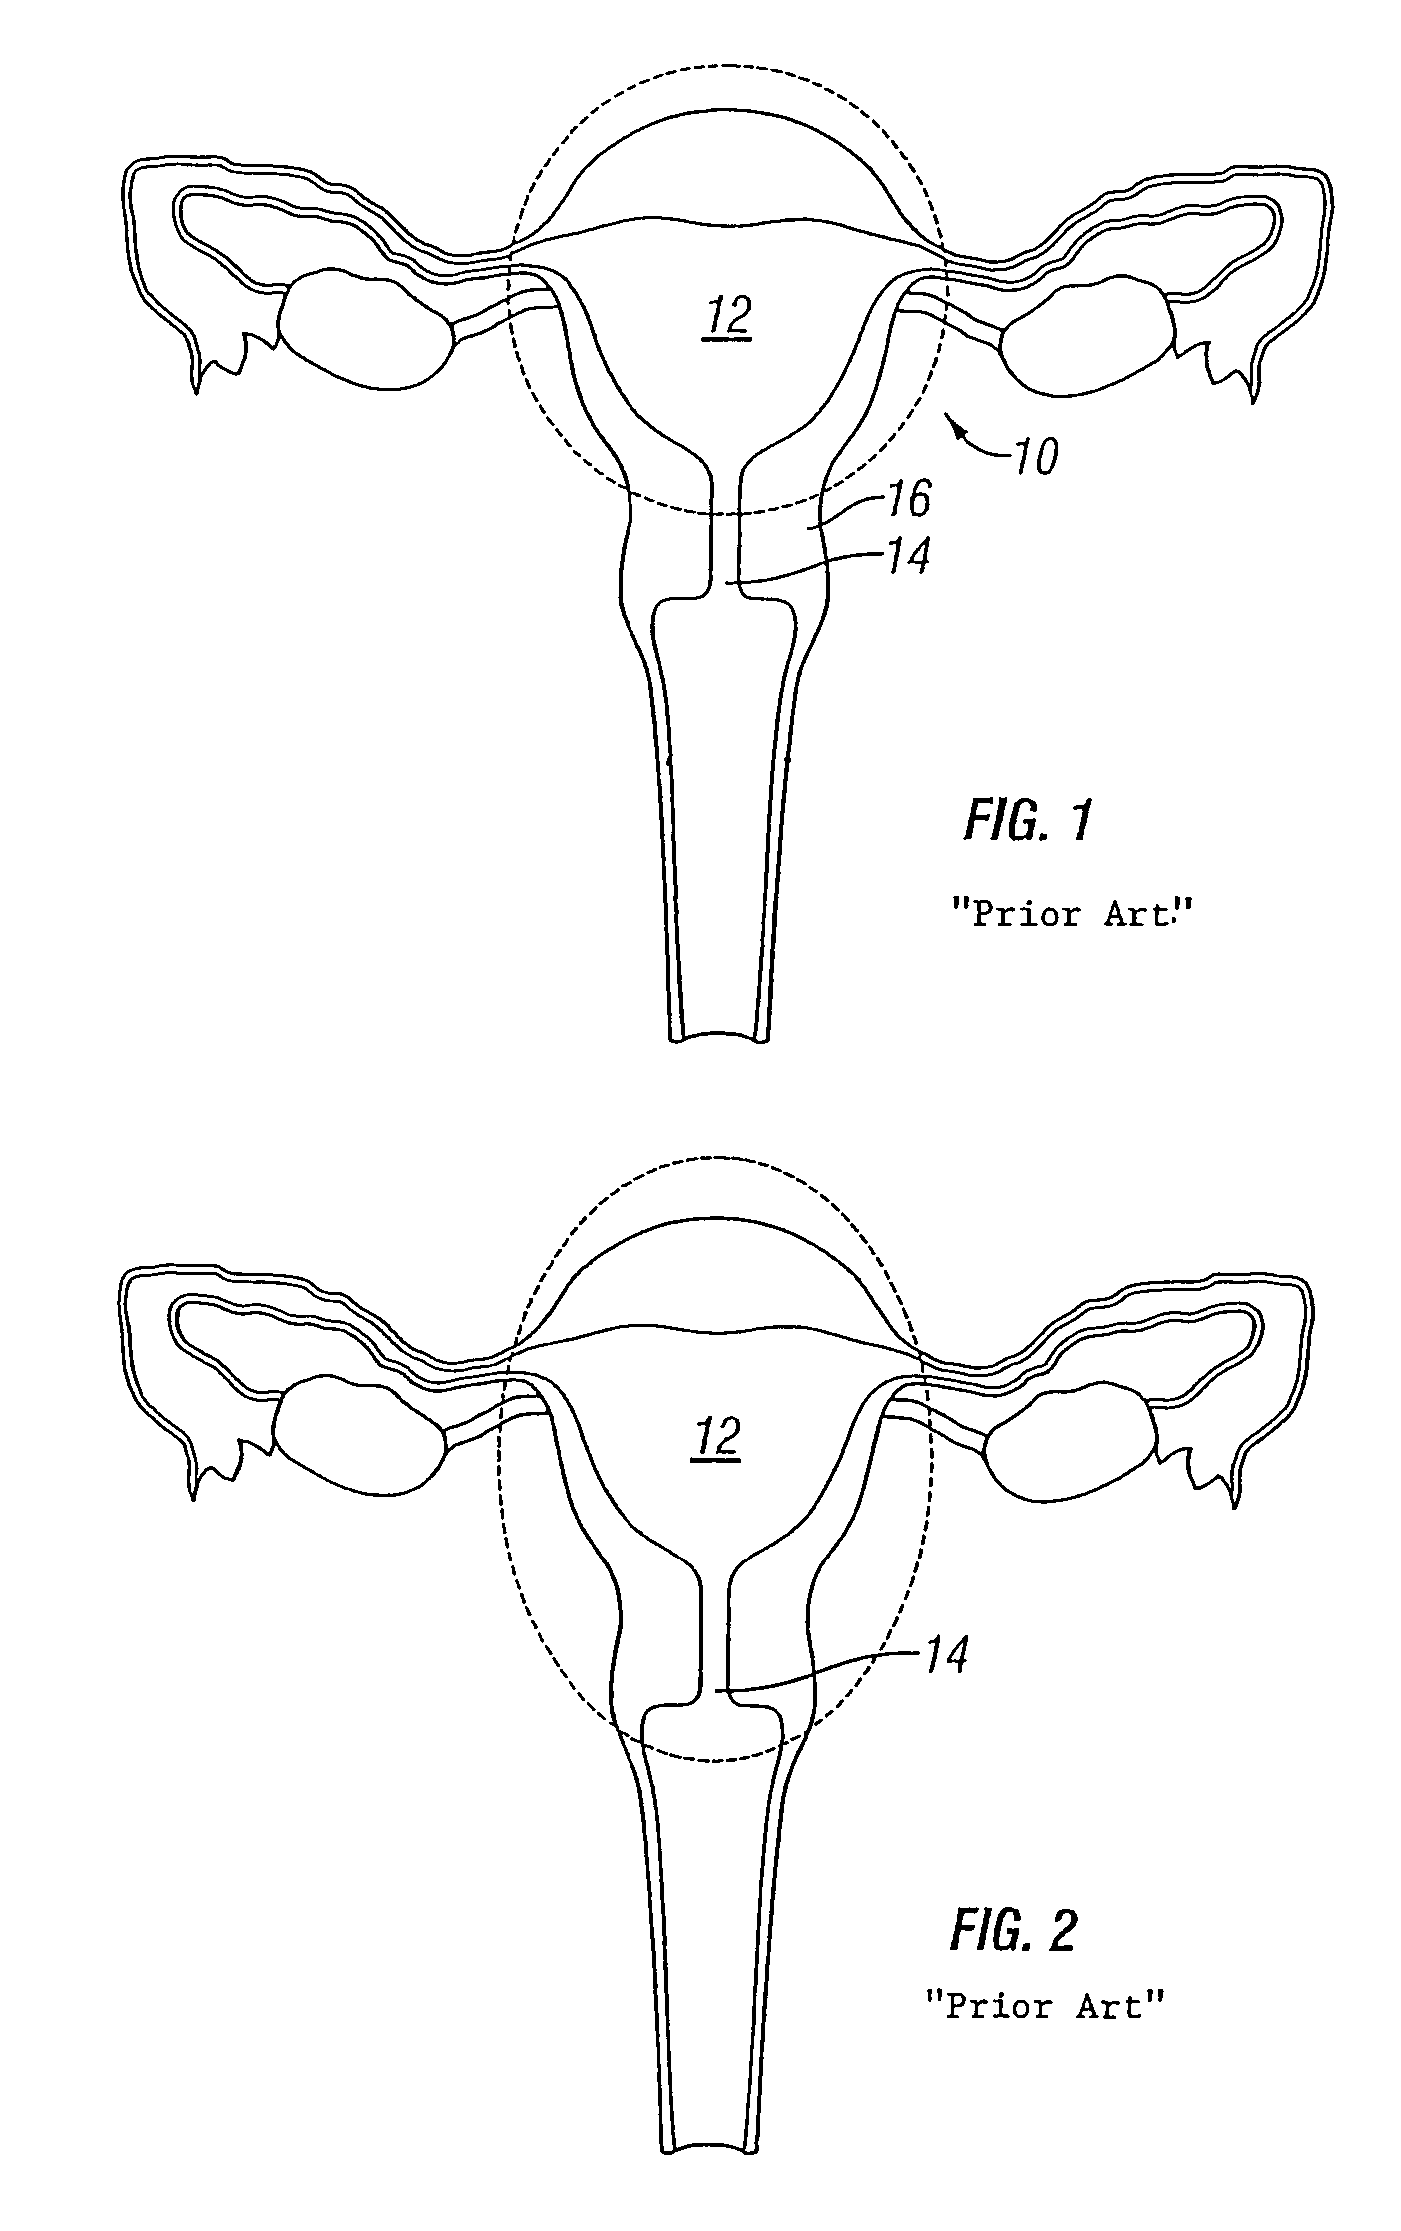 Method and apparatus for creating intrauterine adhesions